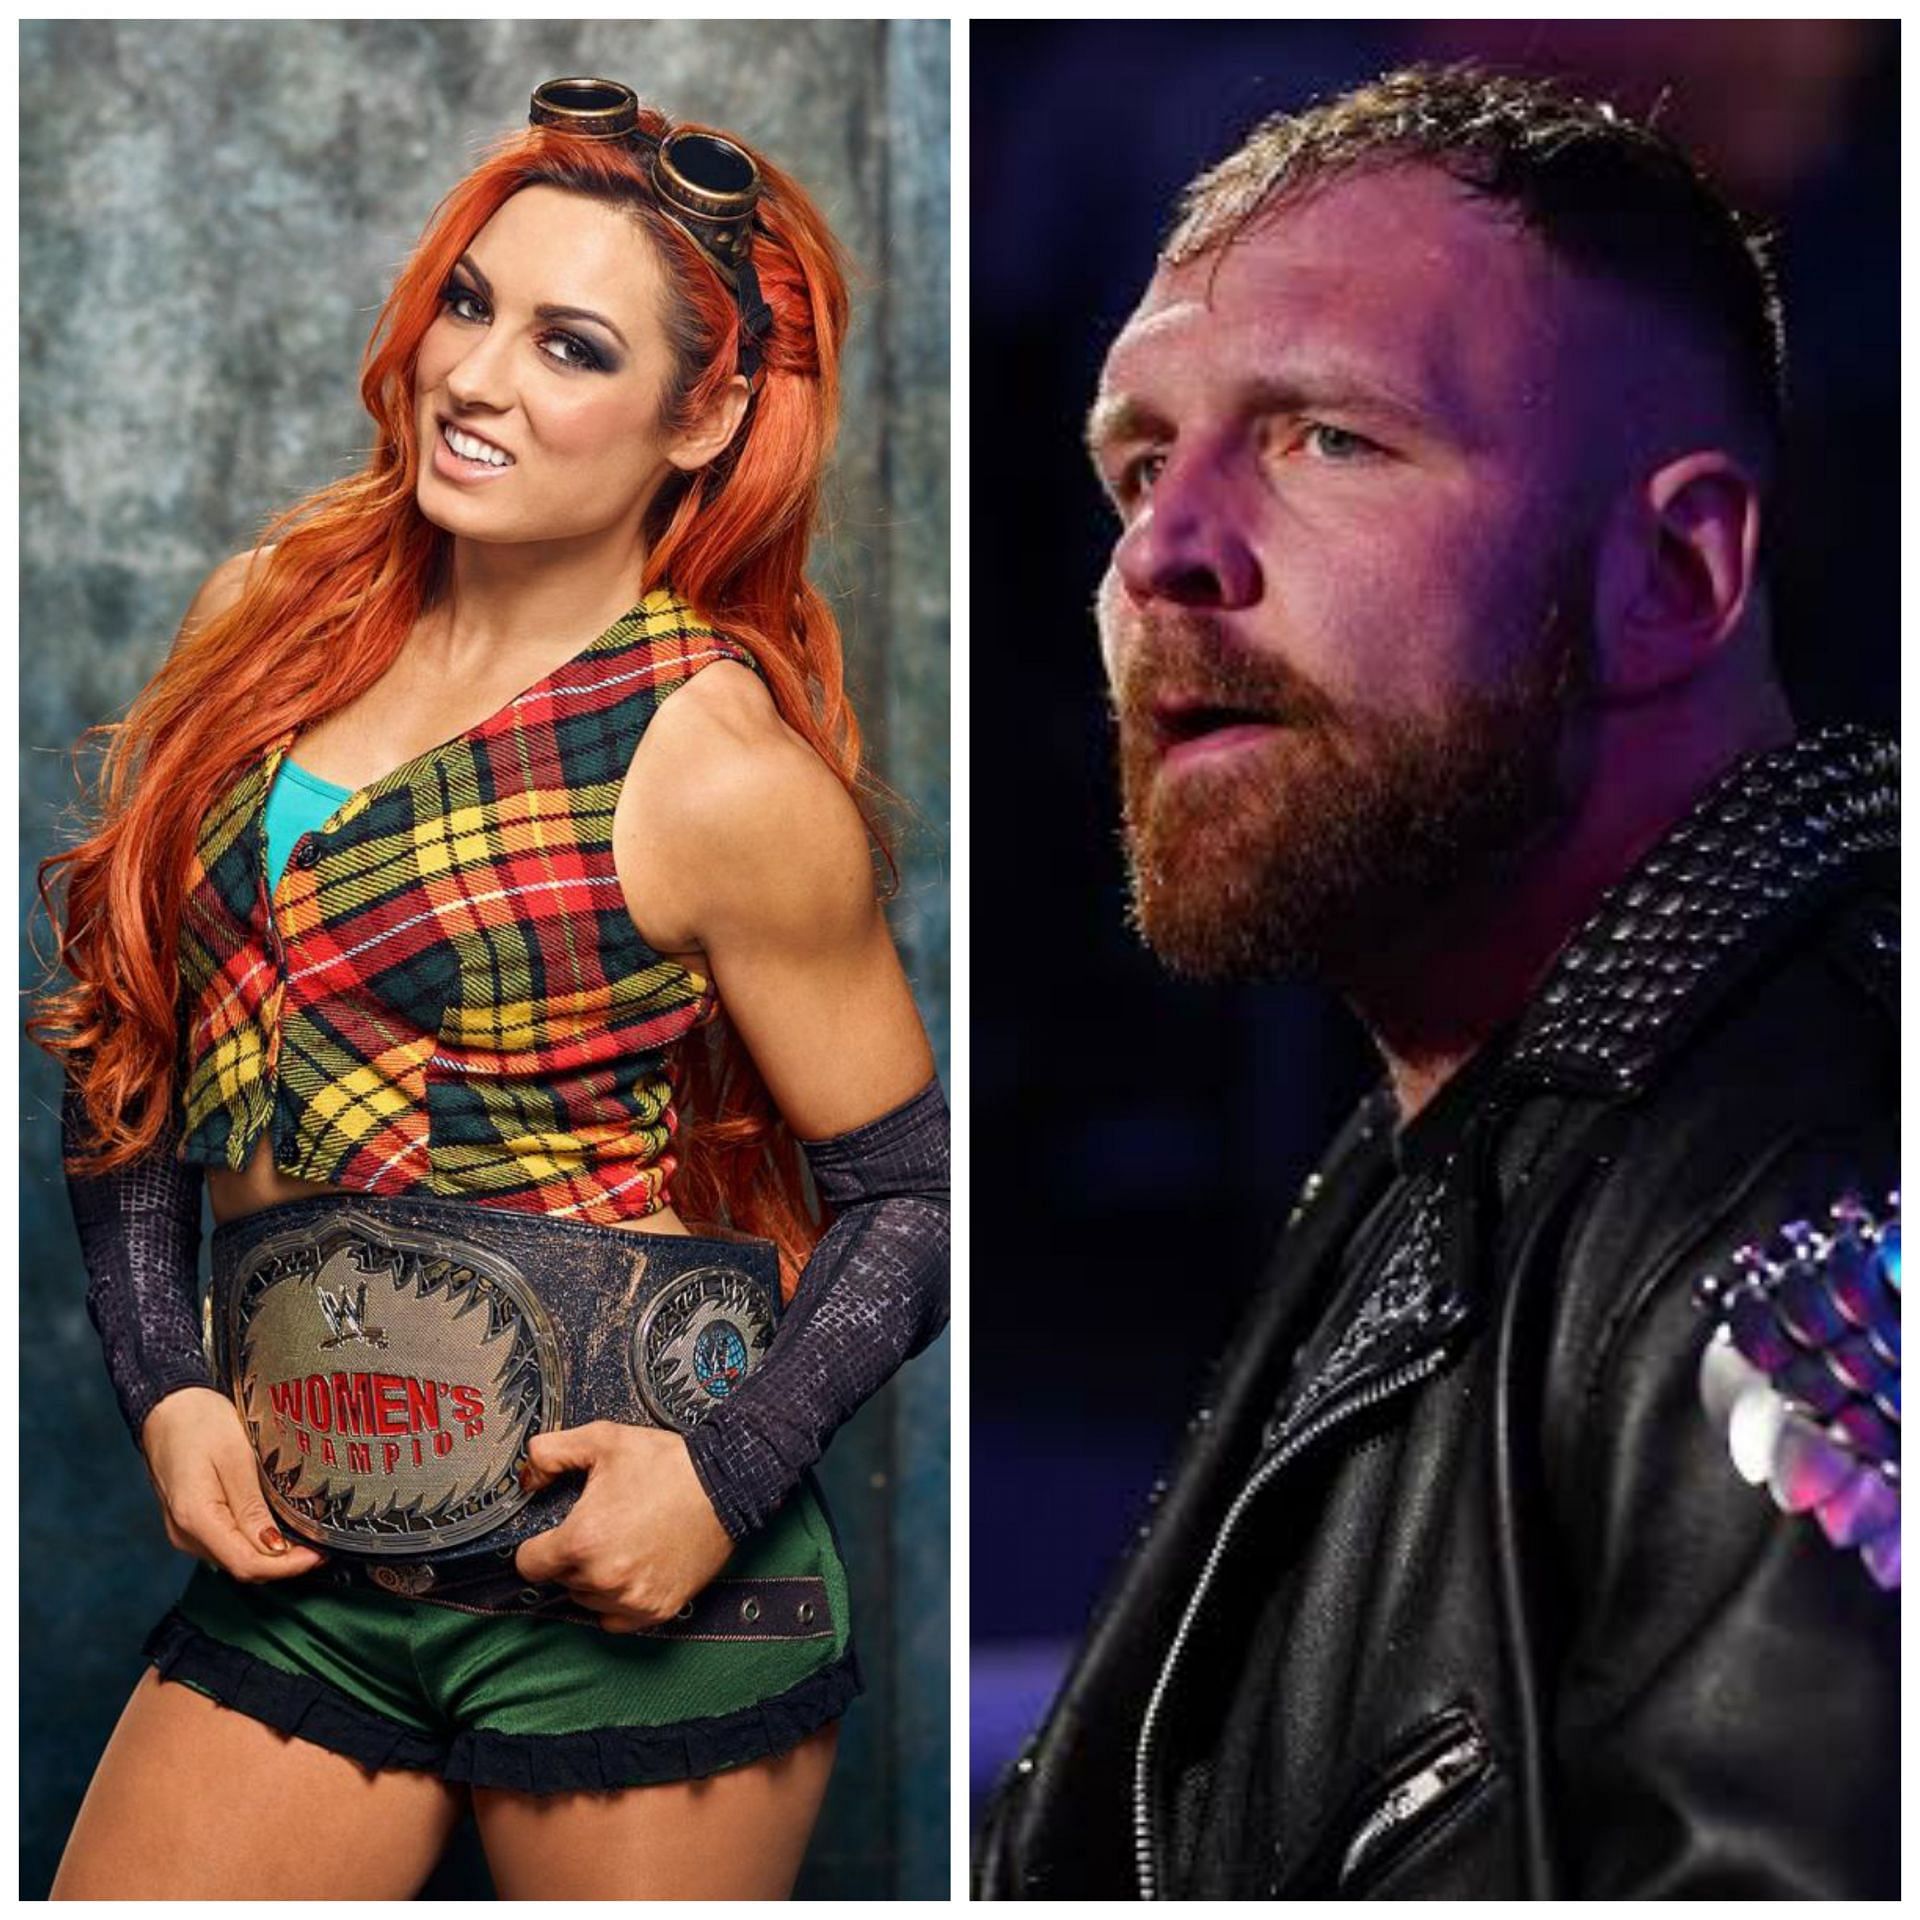 Becky Lynch and Jon Moxley were part of SmackDown in 2016